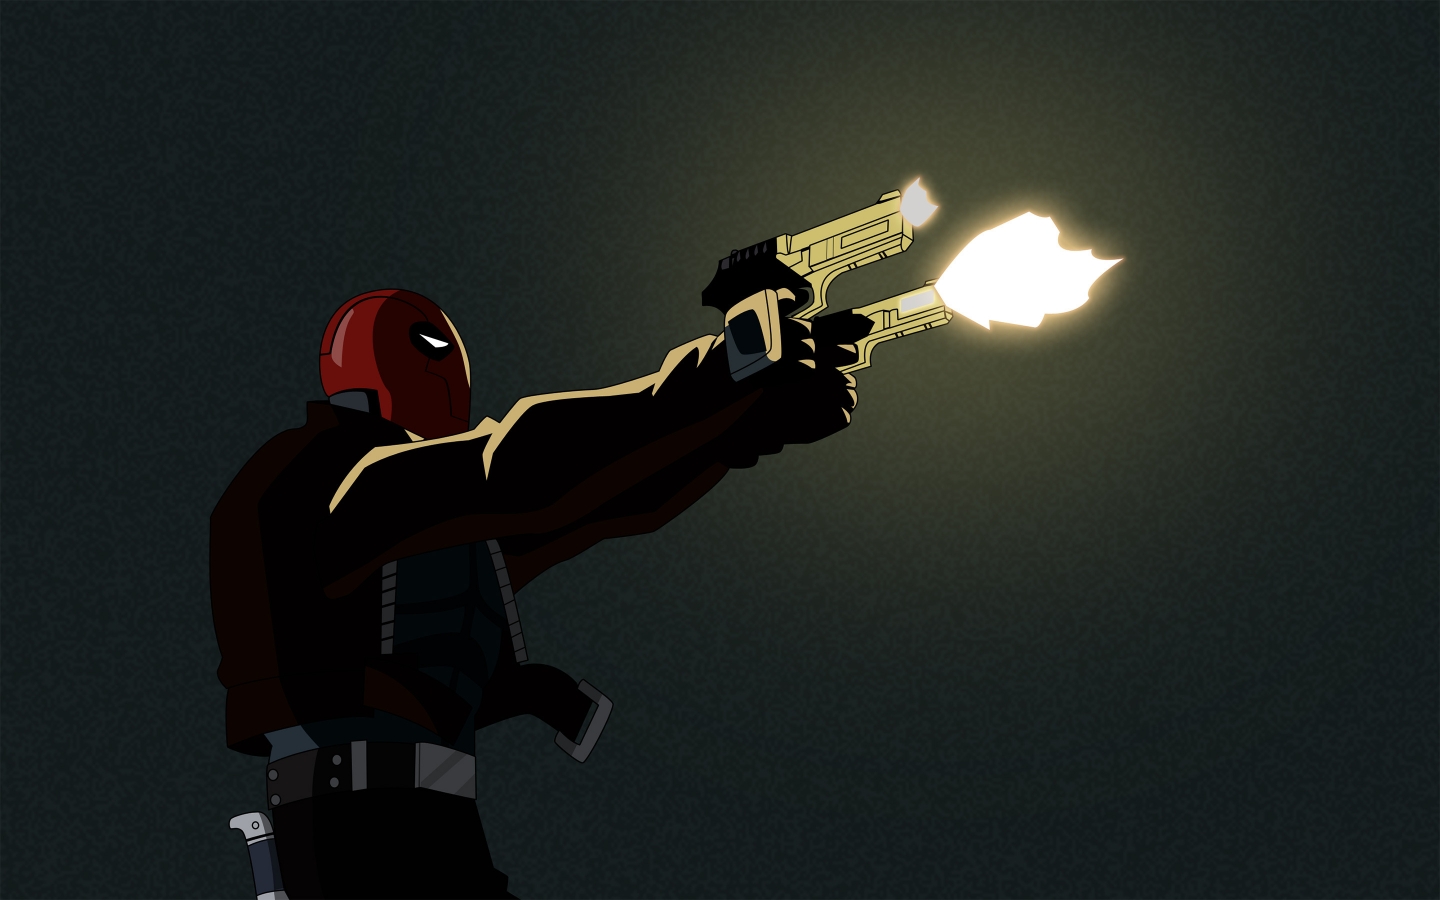 Redhood for 1440 x 900 widescreen resolution